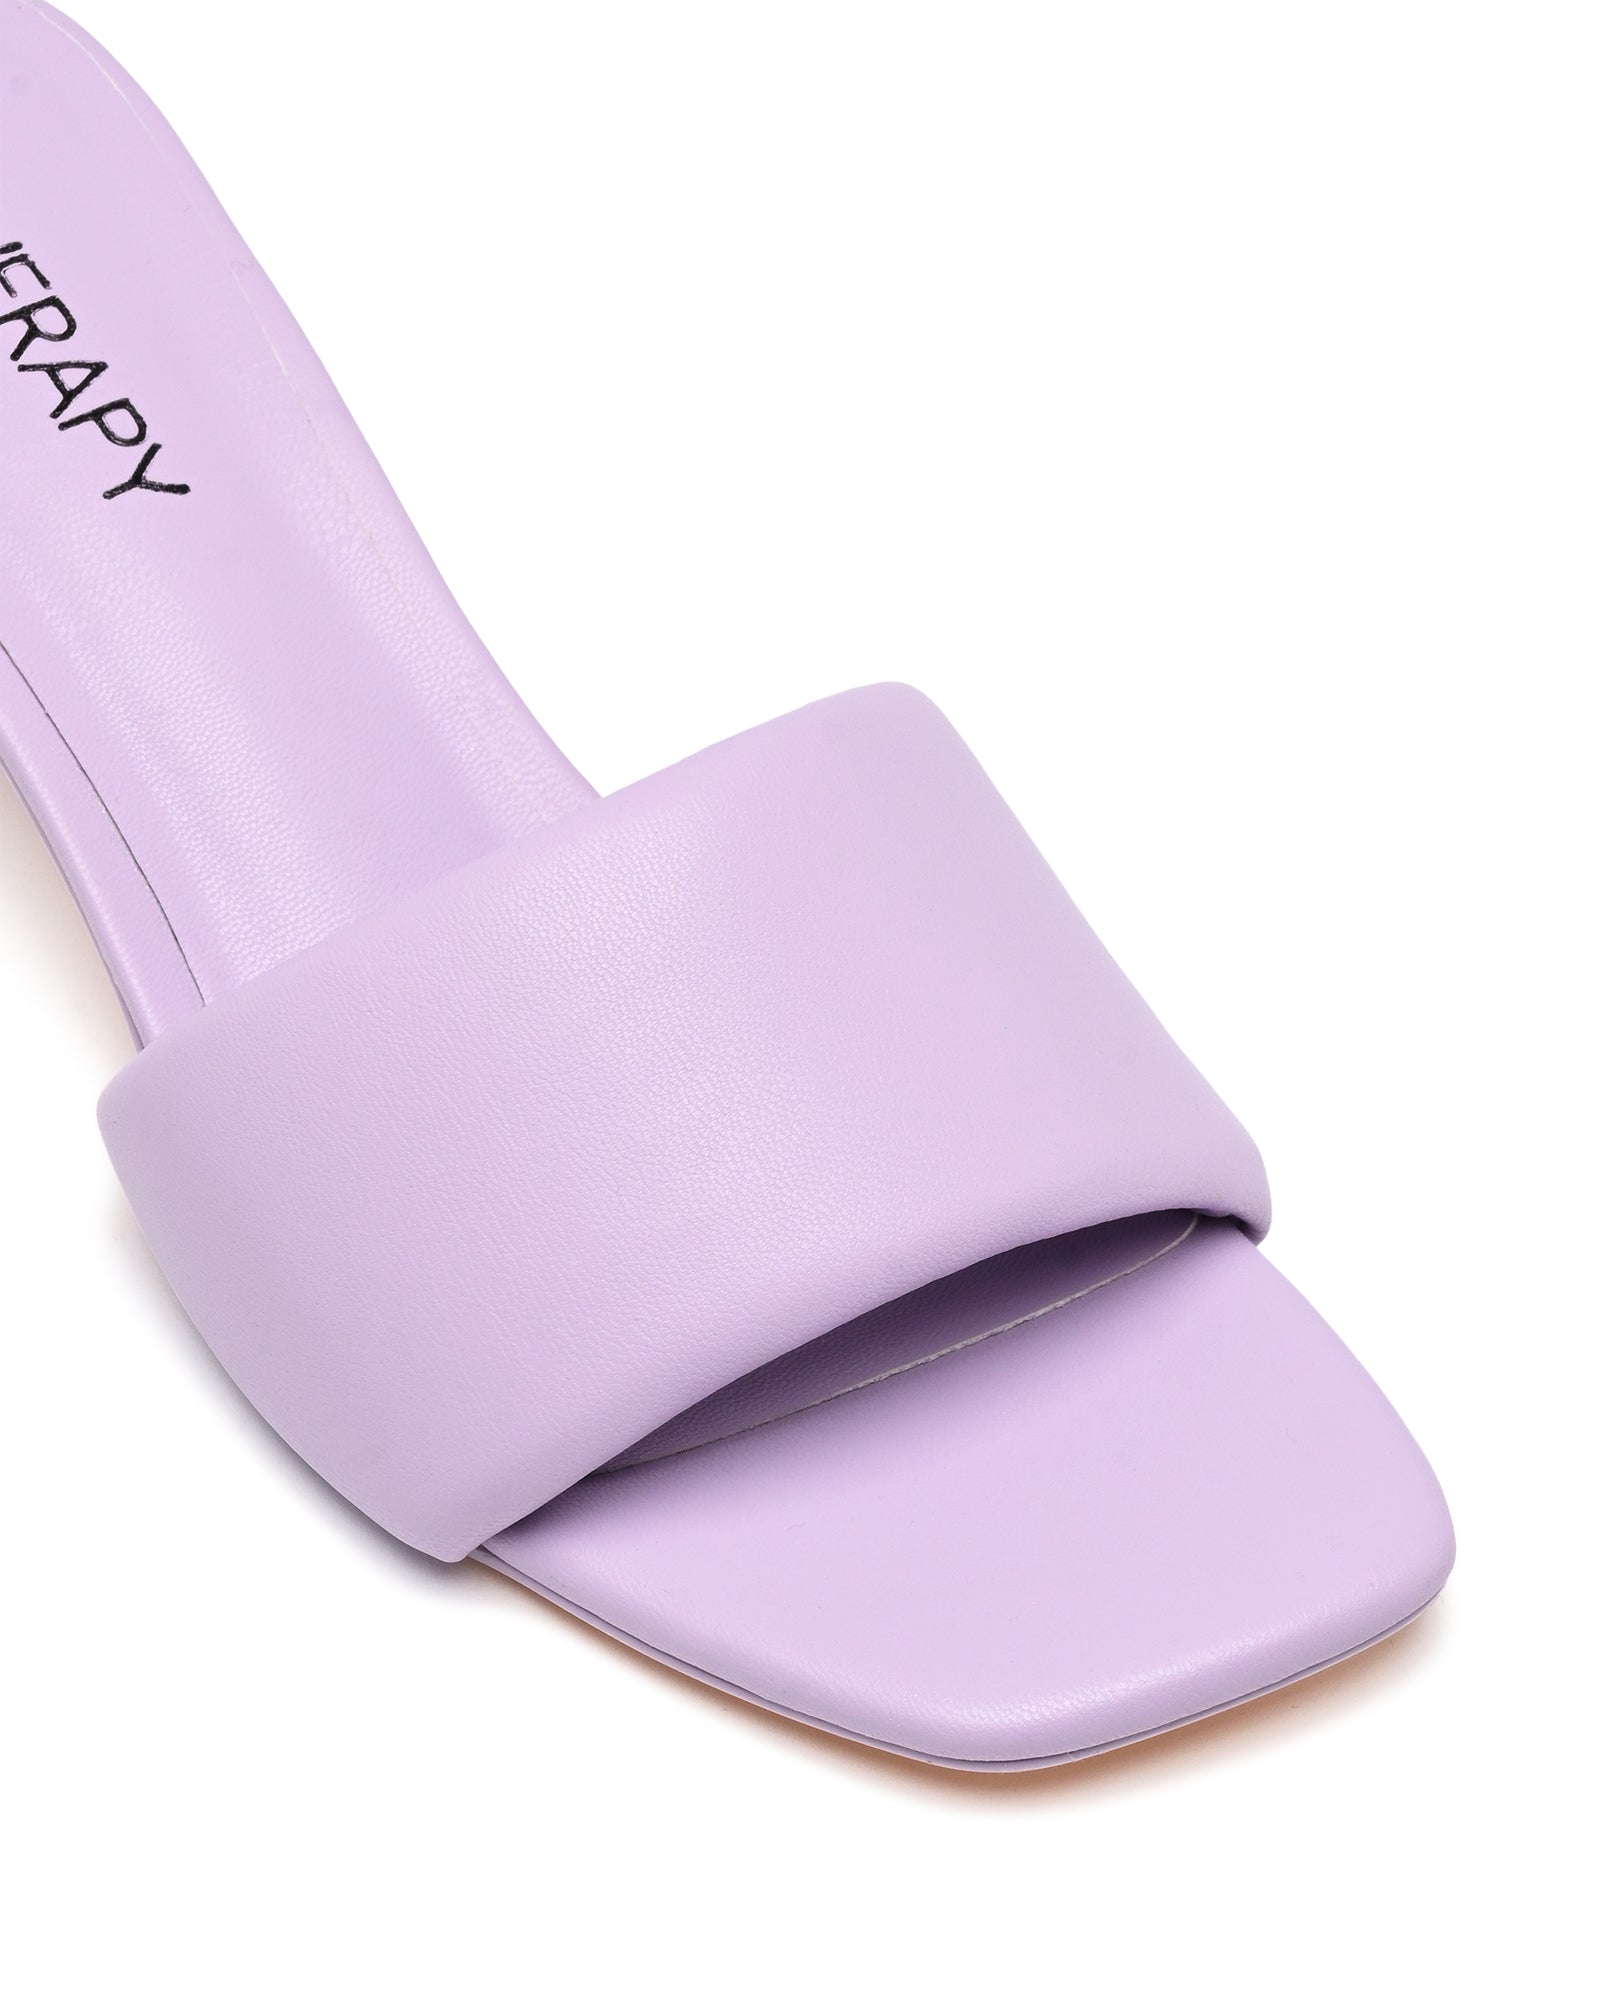 Therapy Shoes Luxe Lilac Smooth | Women's Heels | Mules | Kitten | Low